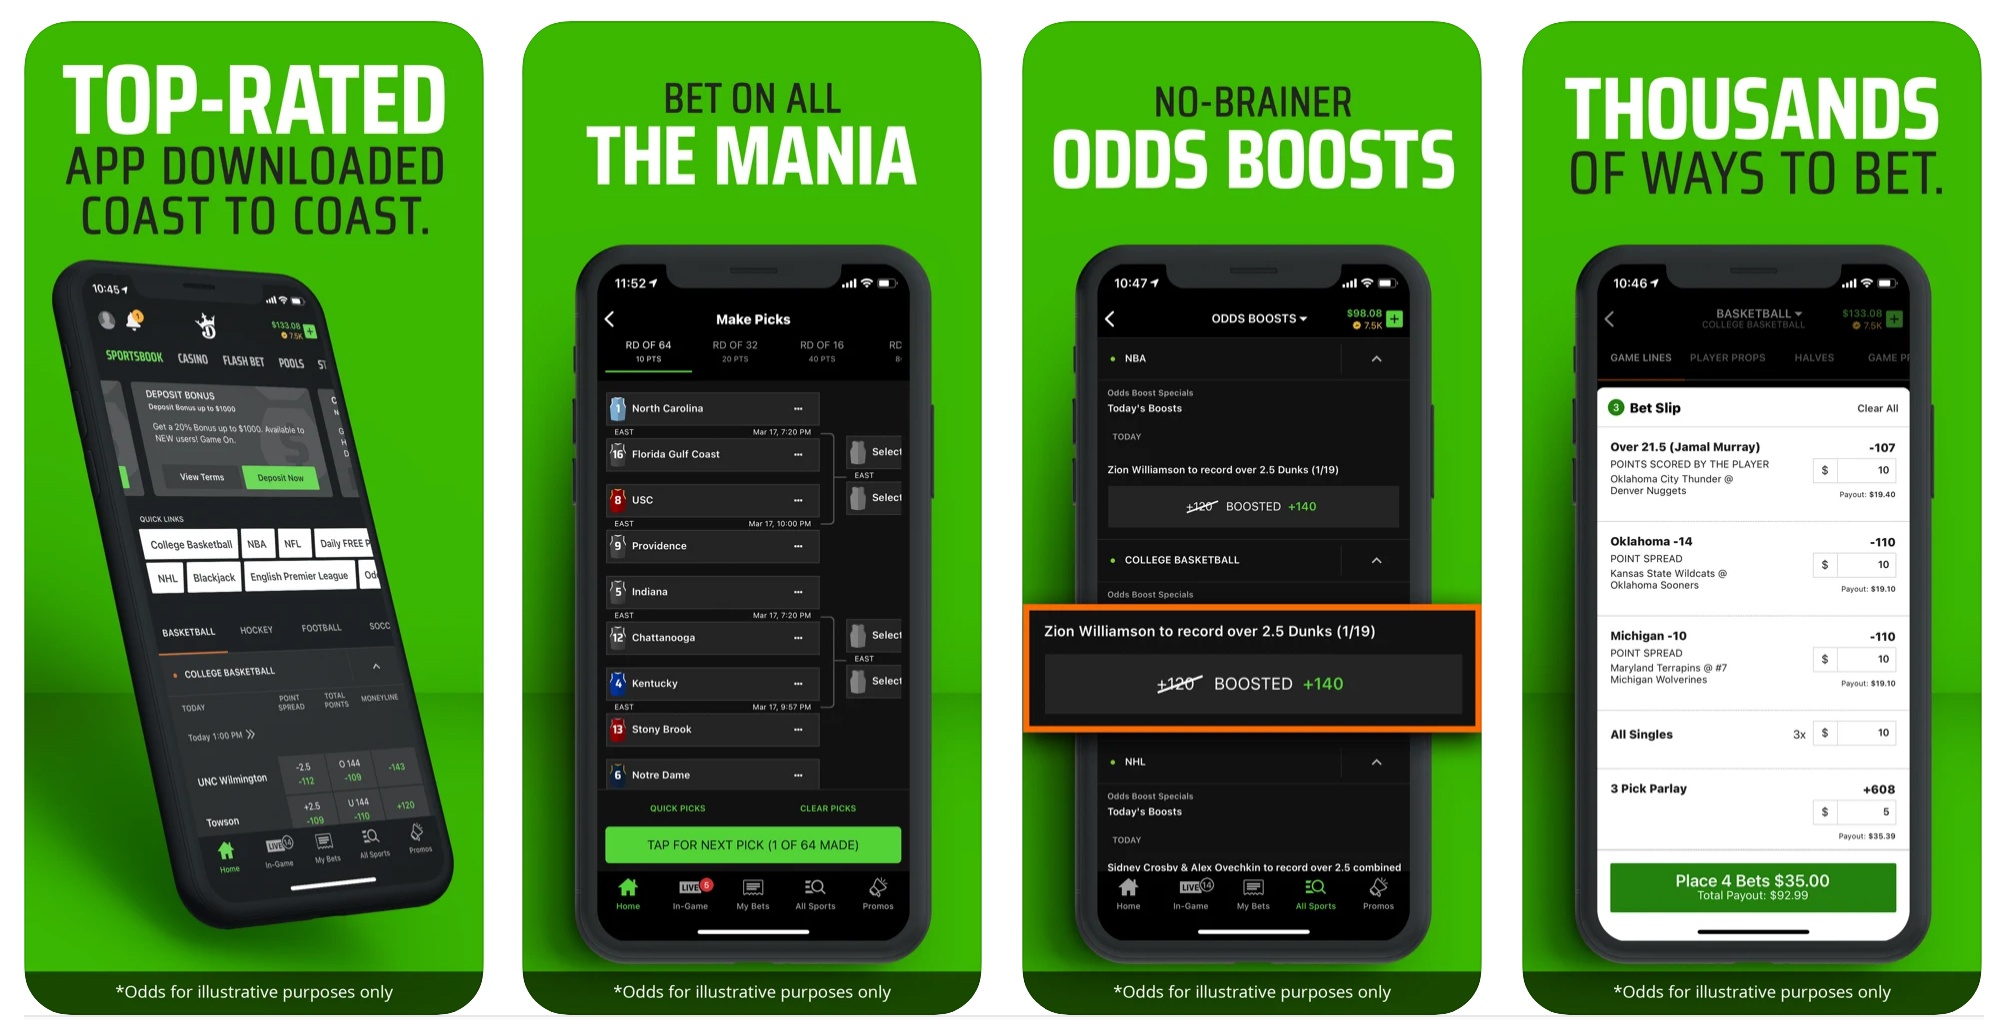 DraftKings Sportsbook Mobile App Features